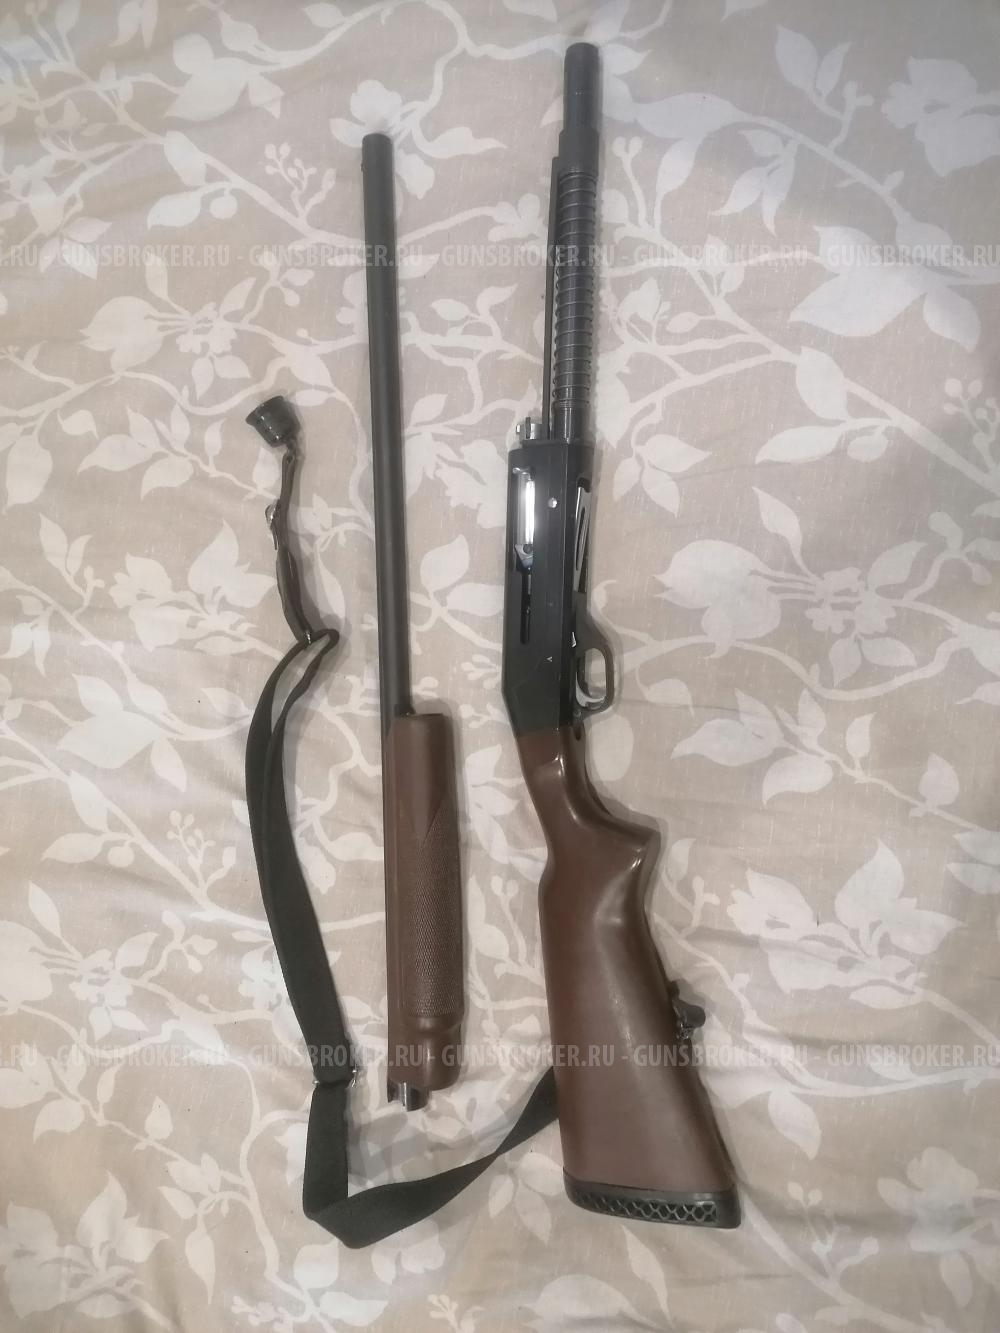 Stoeger 2000a 